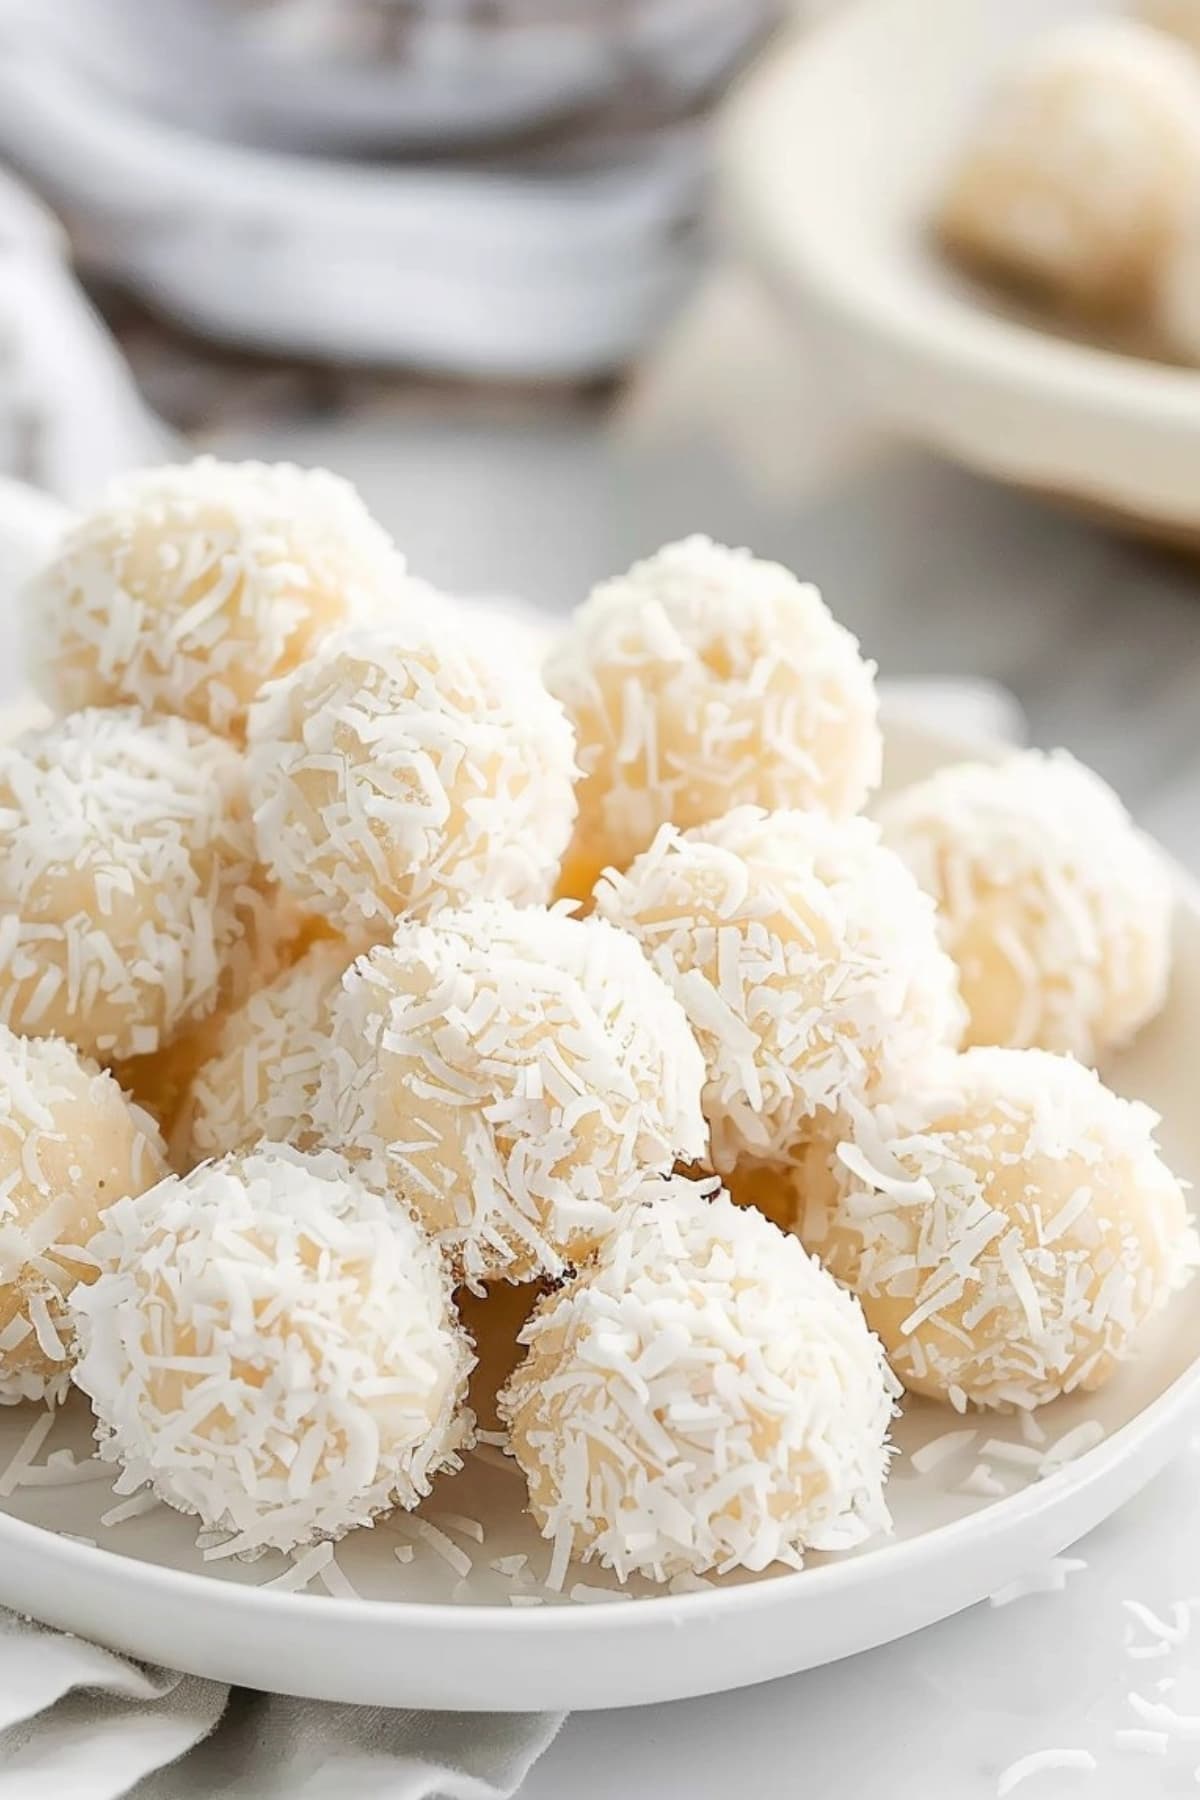 Pile of coconut snowballs in a white plate.